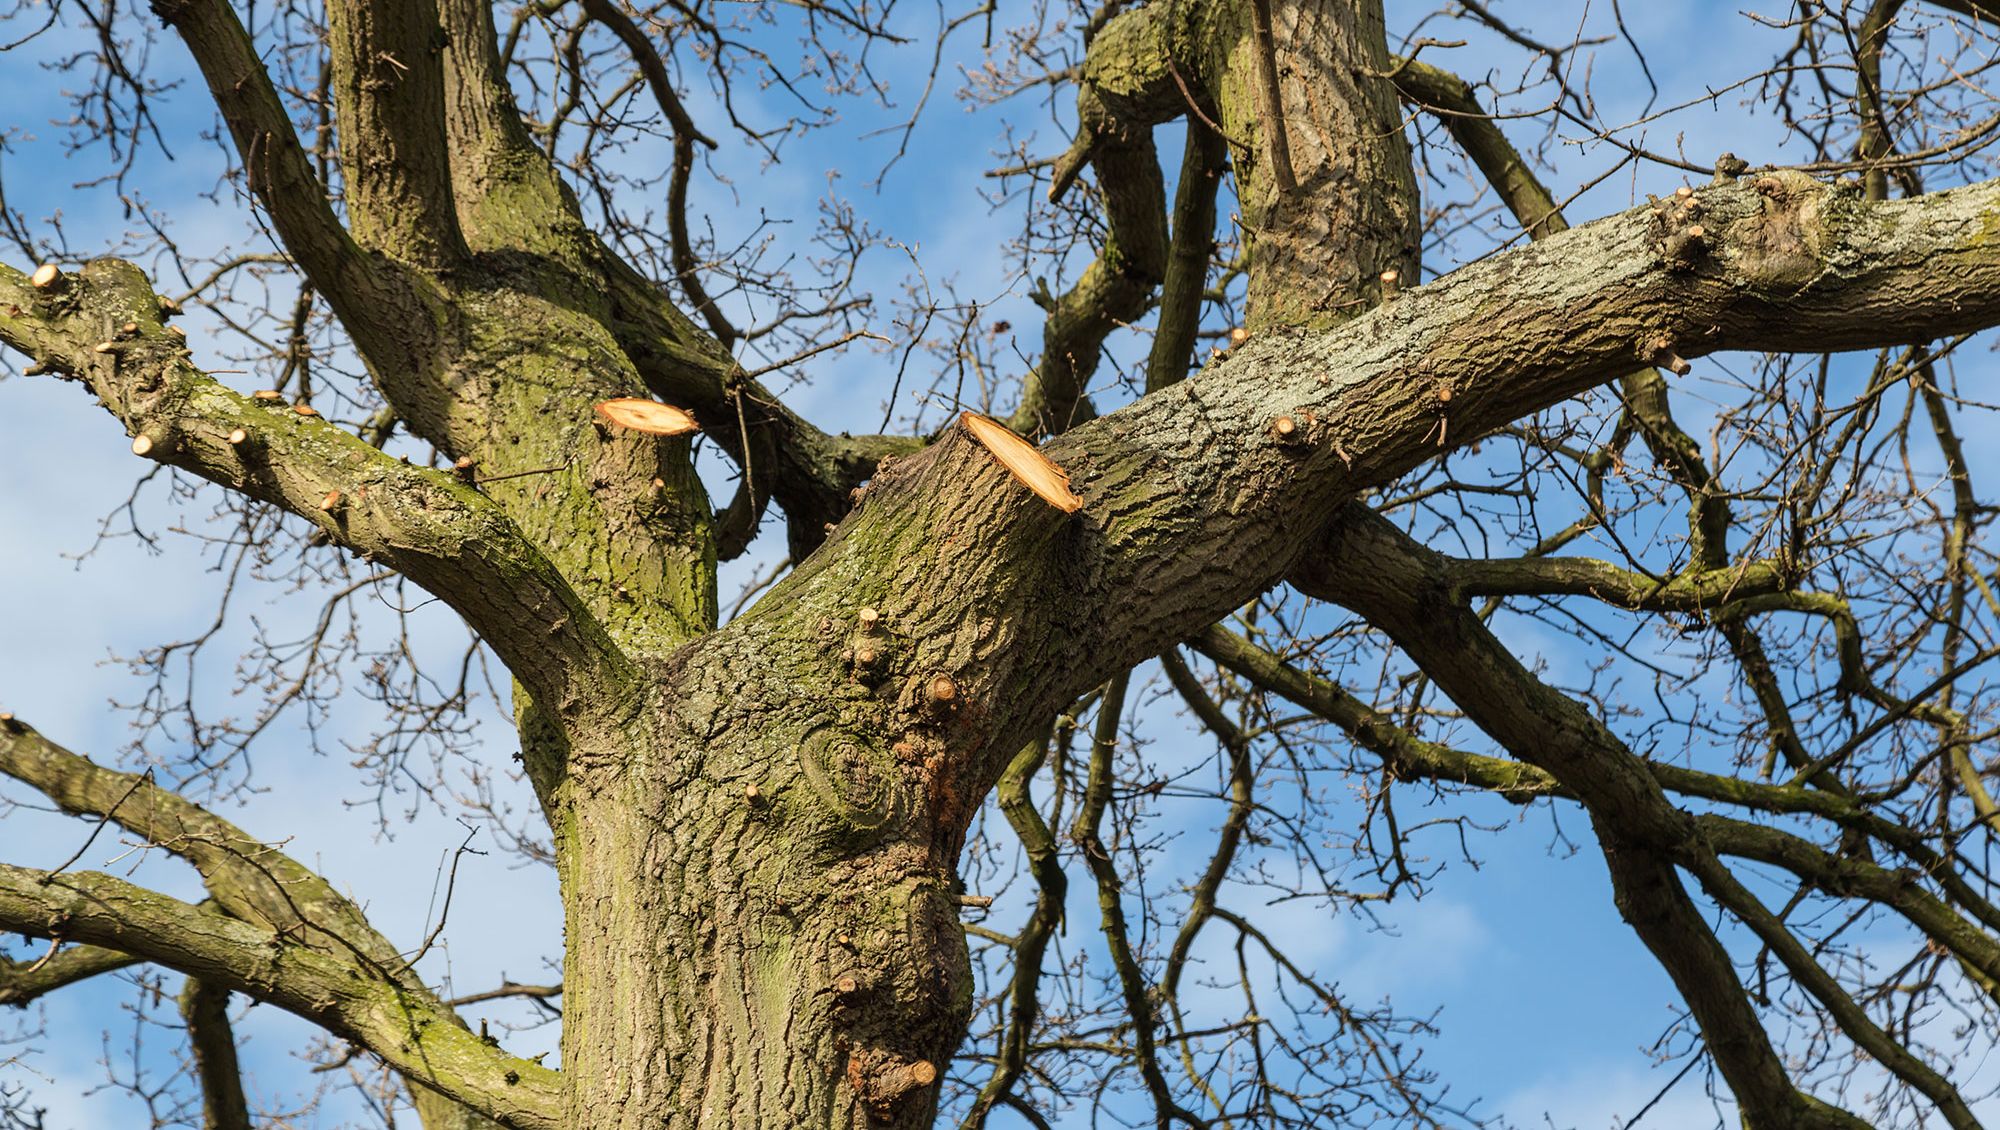 Tree Surgeon, your most common questions answered